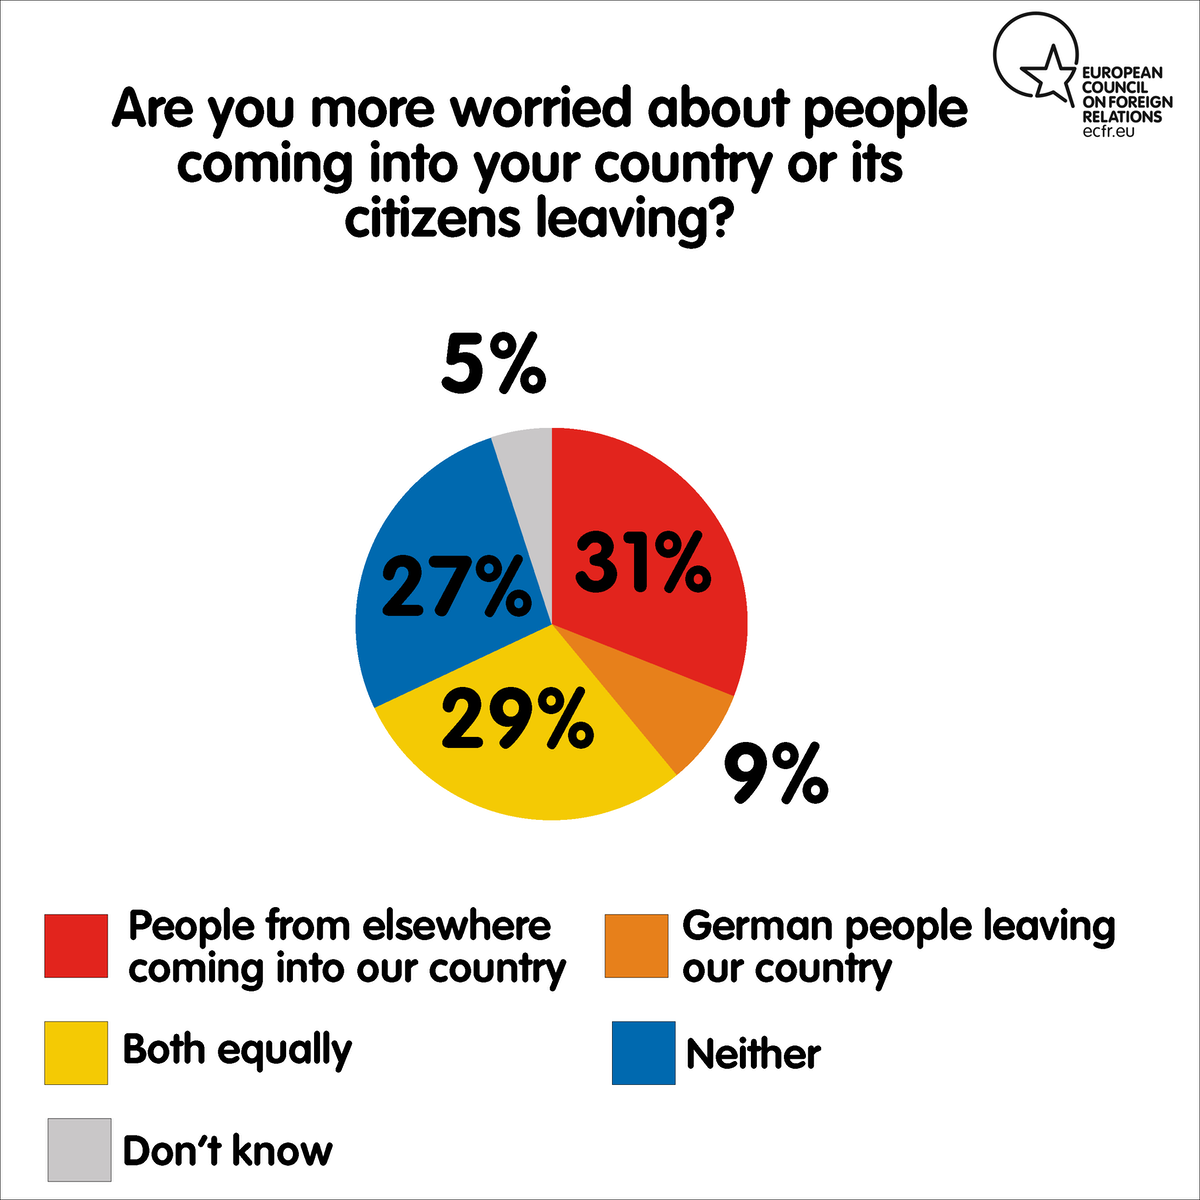 Are you more worried about people coming into your country or [NATIONALITY] people leaving?